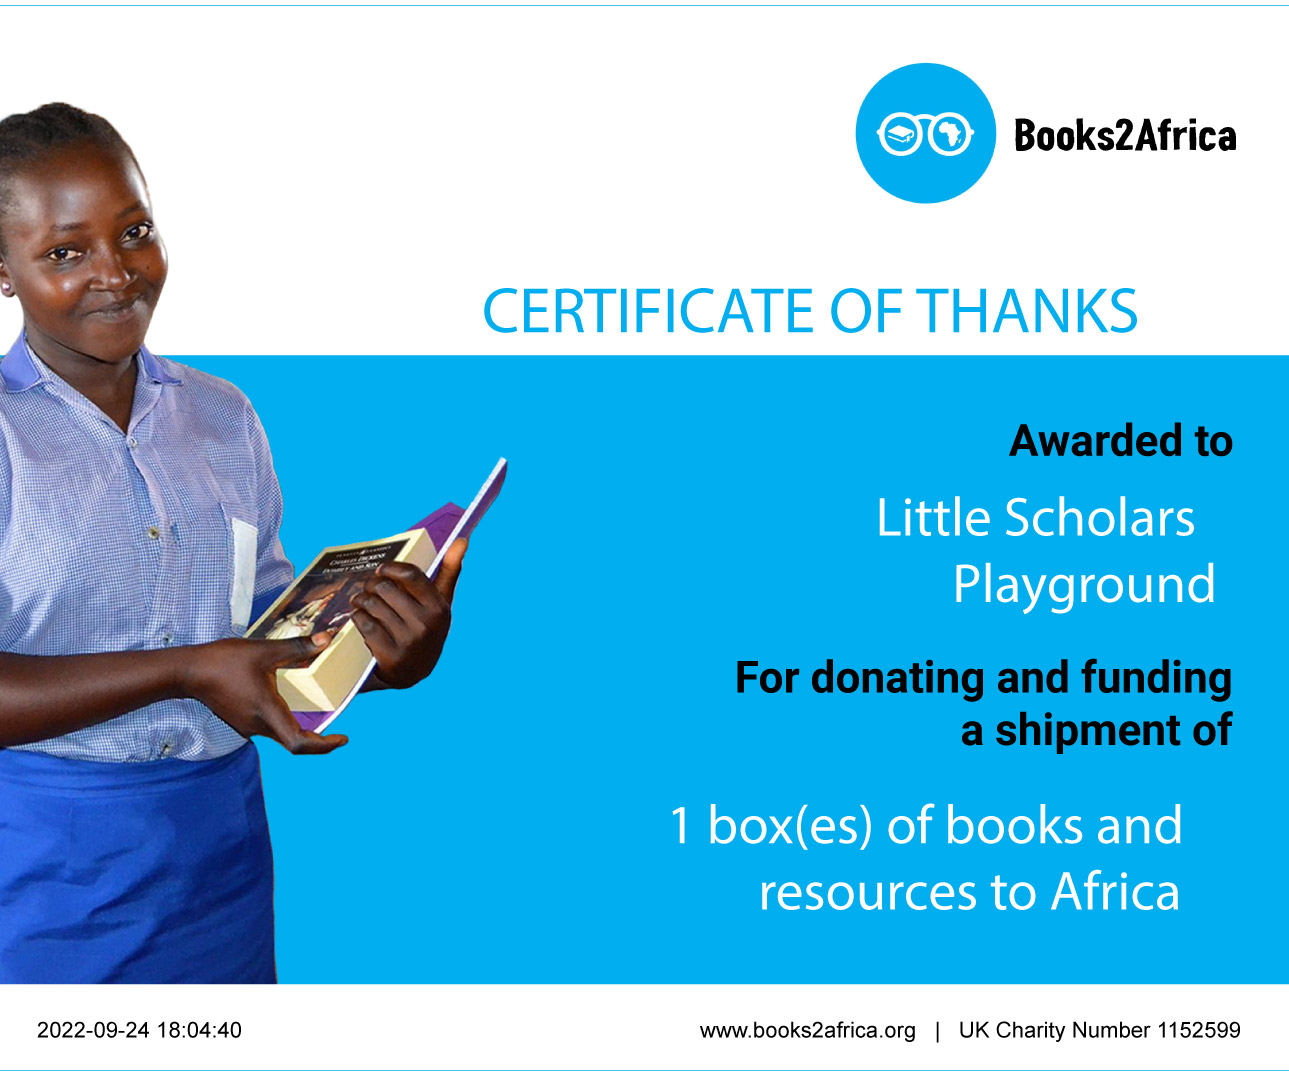 Donated books to Africa